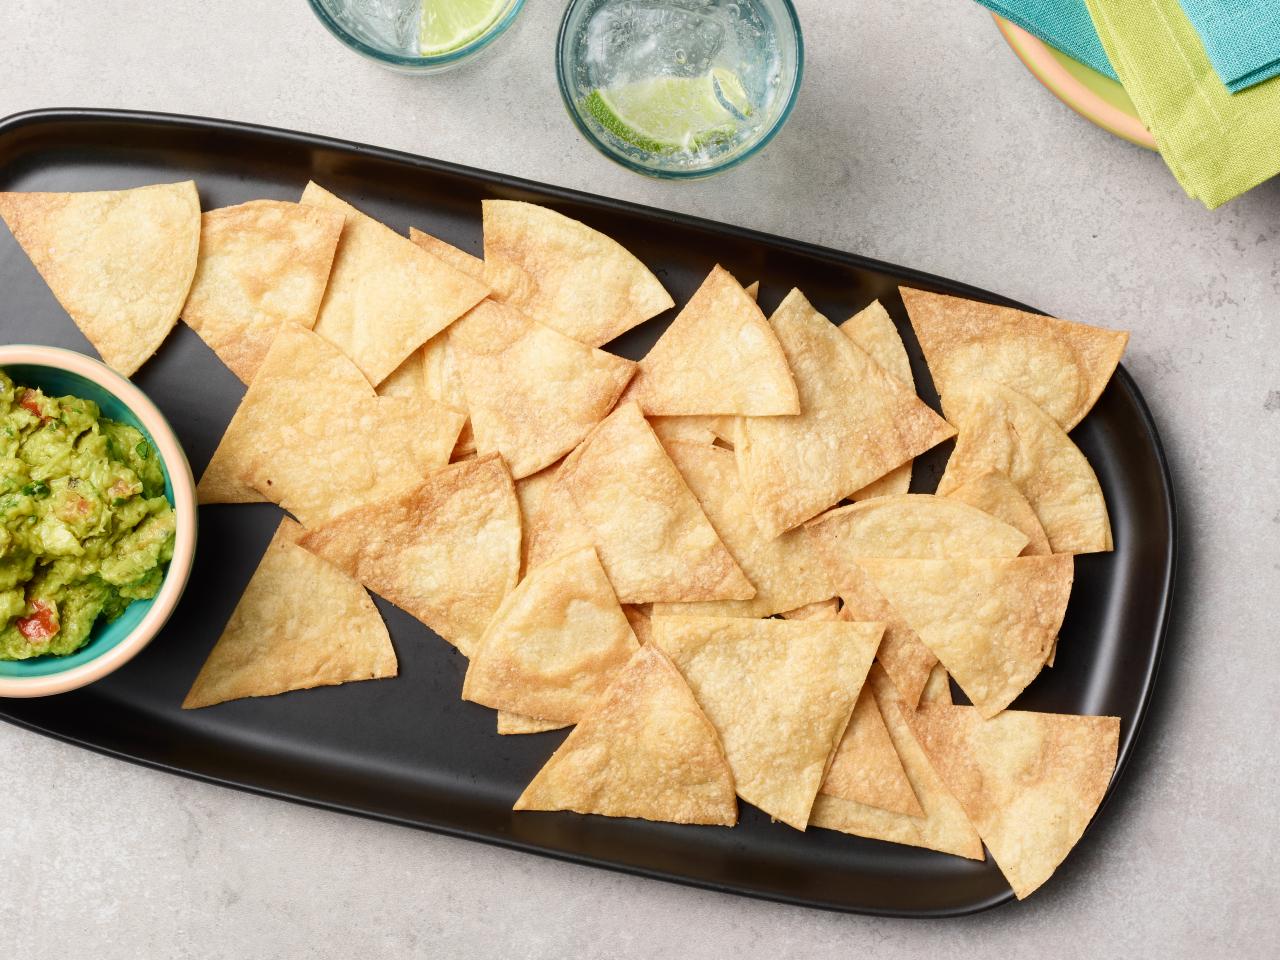 How to Make Tortilla Chips Recipe